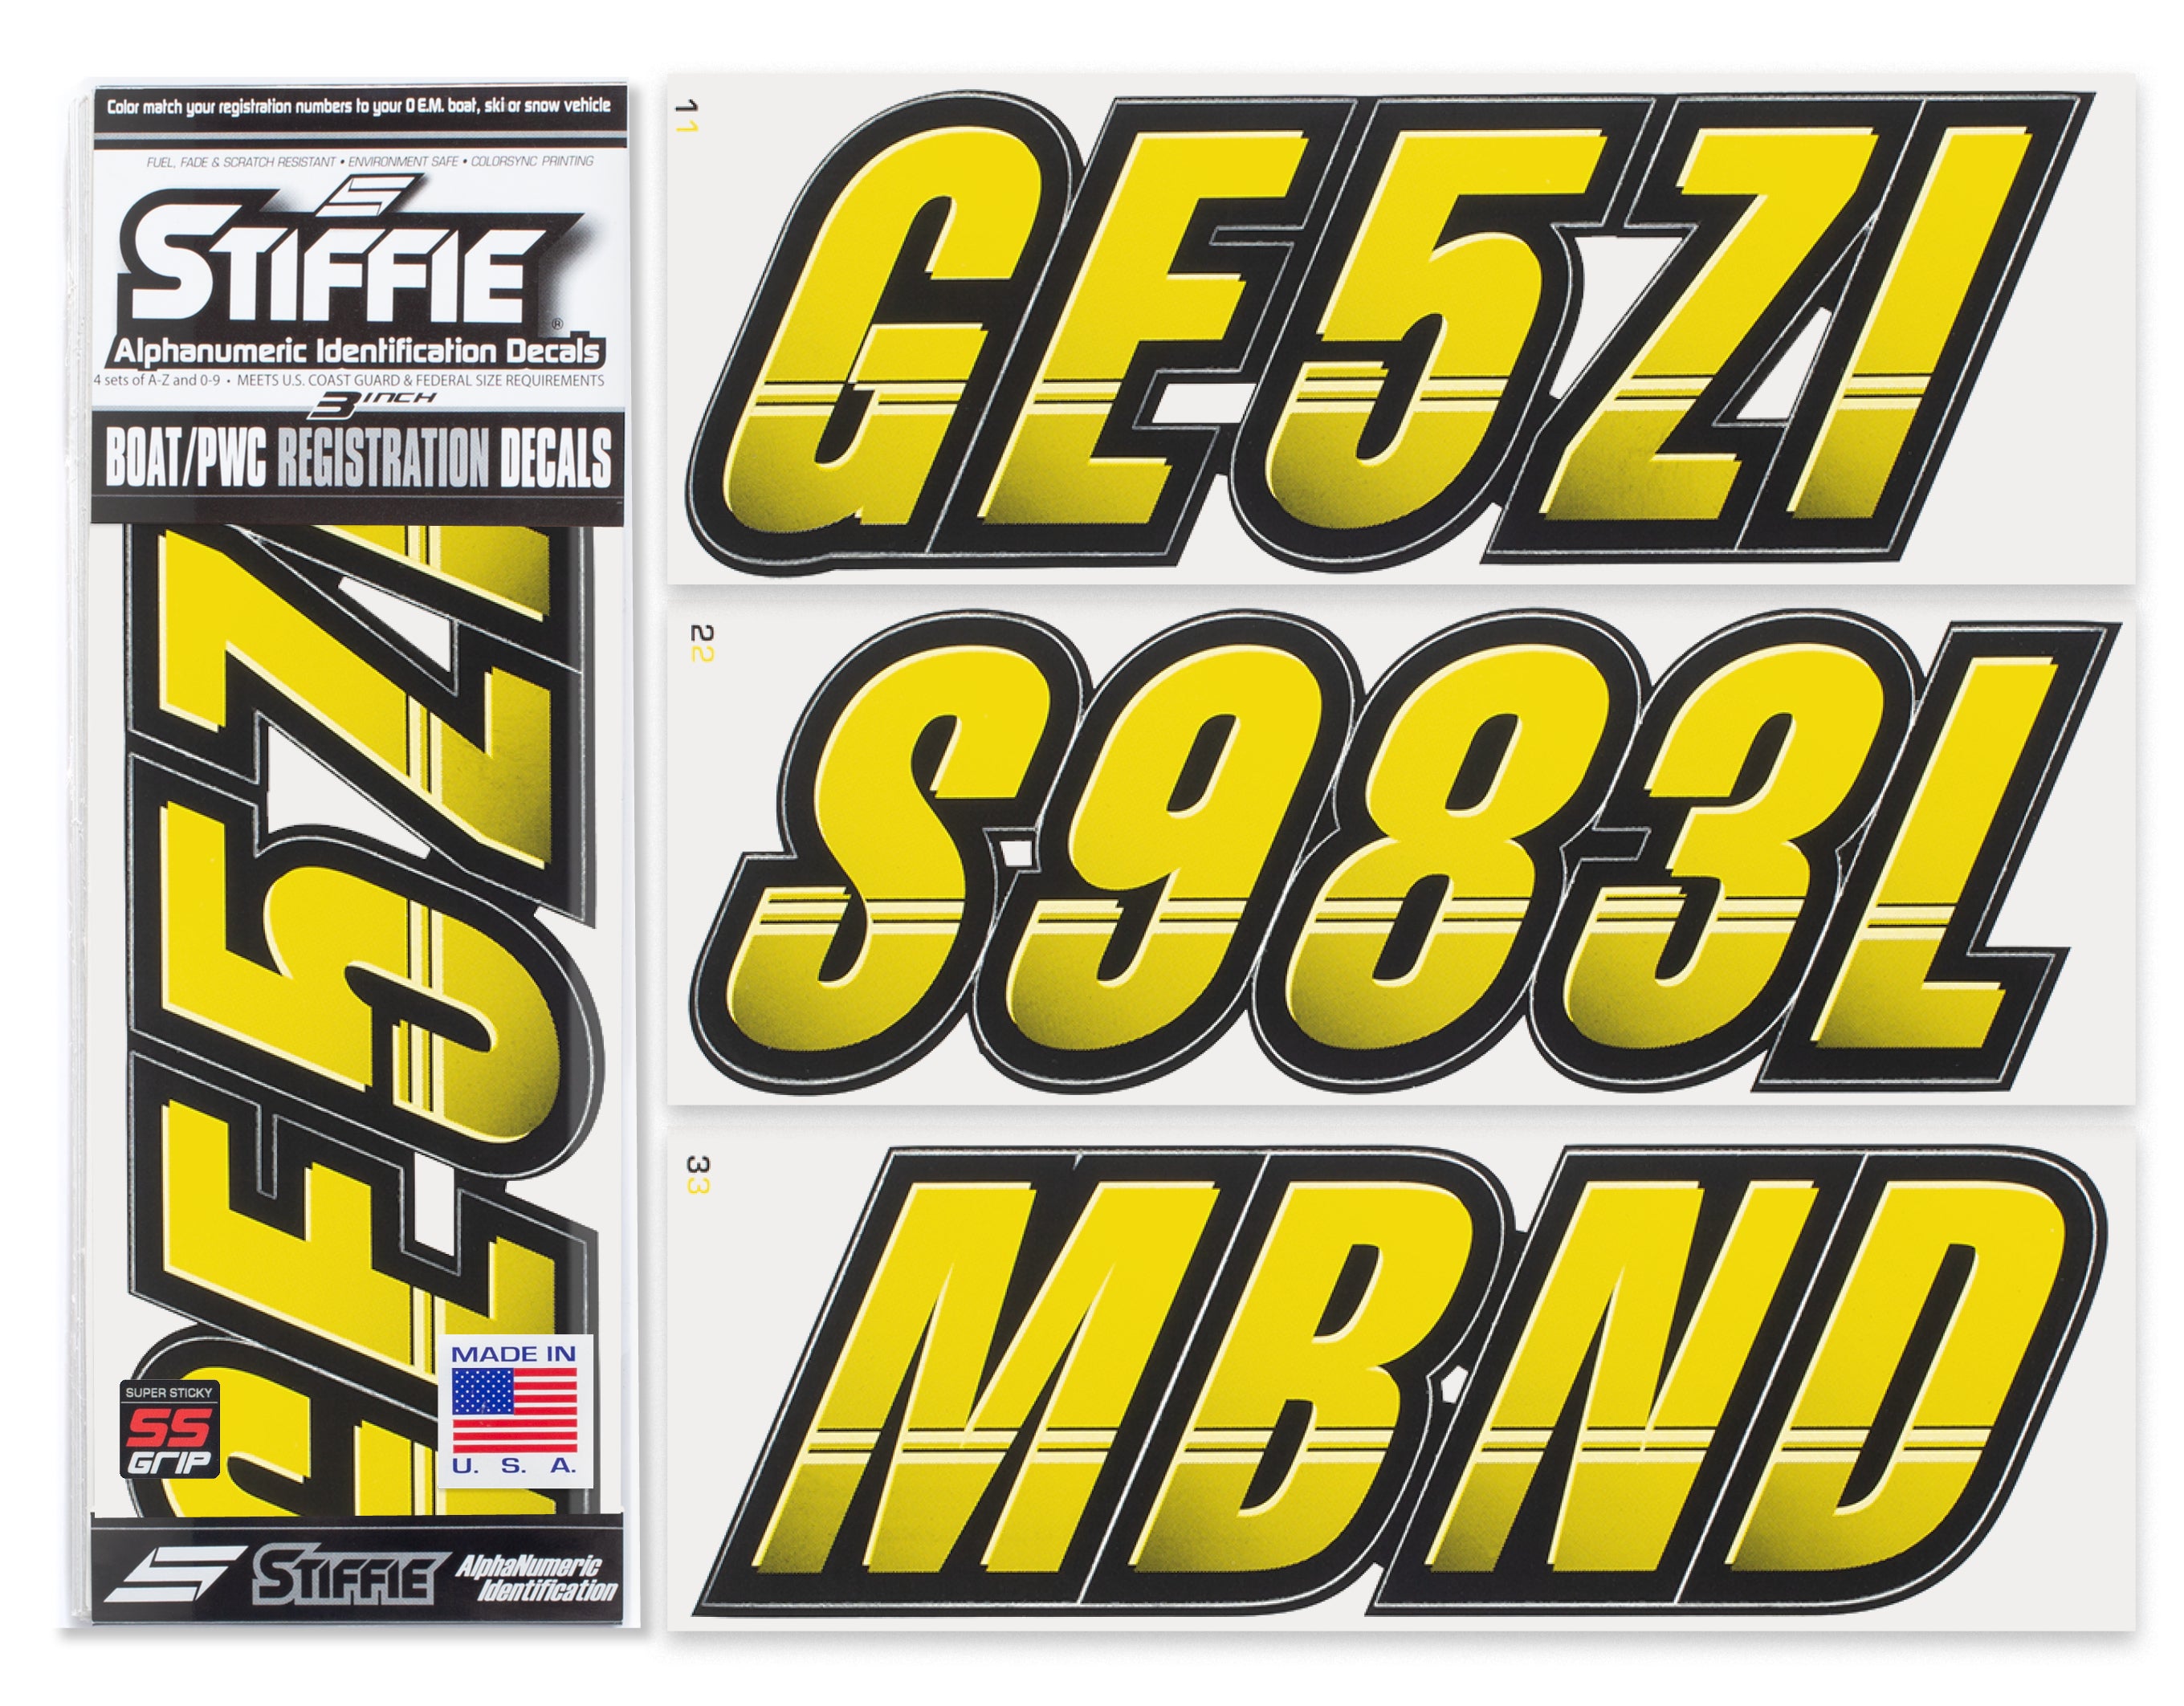 STIFFIE Techtron Yellow Crush/Black Super Sticky 3" Alpha Numeric Registration Identification Numbers Stickers Decals for Sea-Doo Spark, Inflatable Boats, Ribs, Hypalon/PVC, PWC and Boats